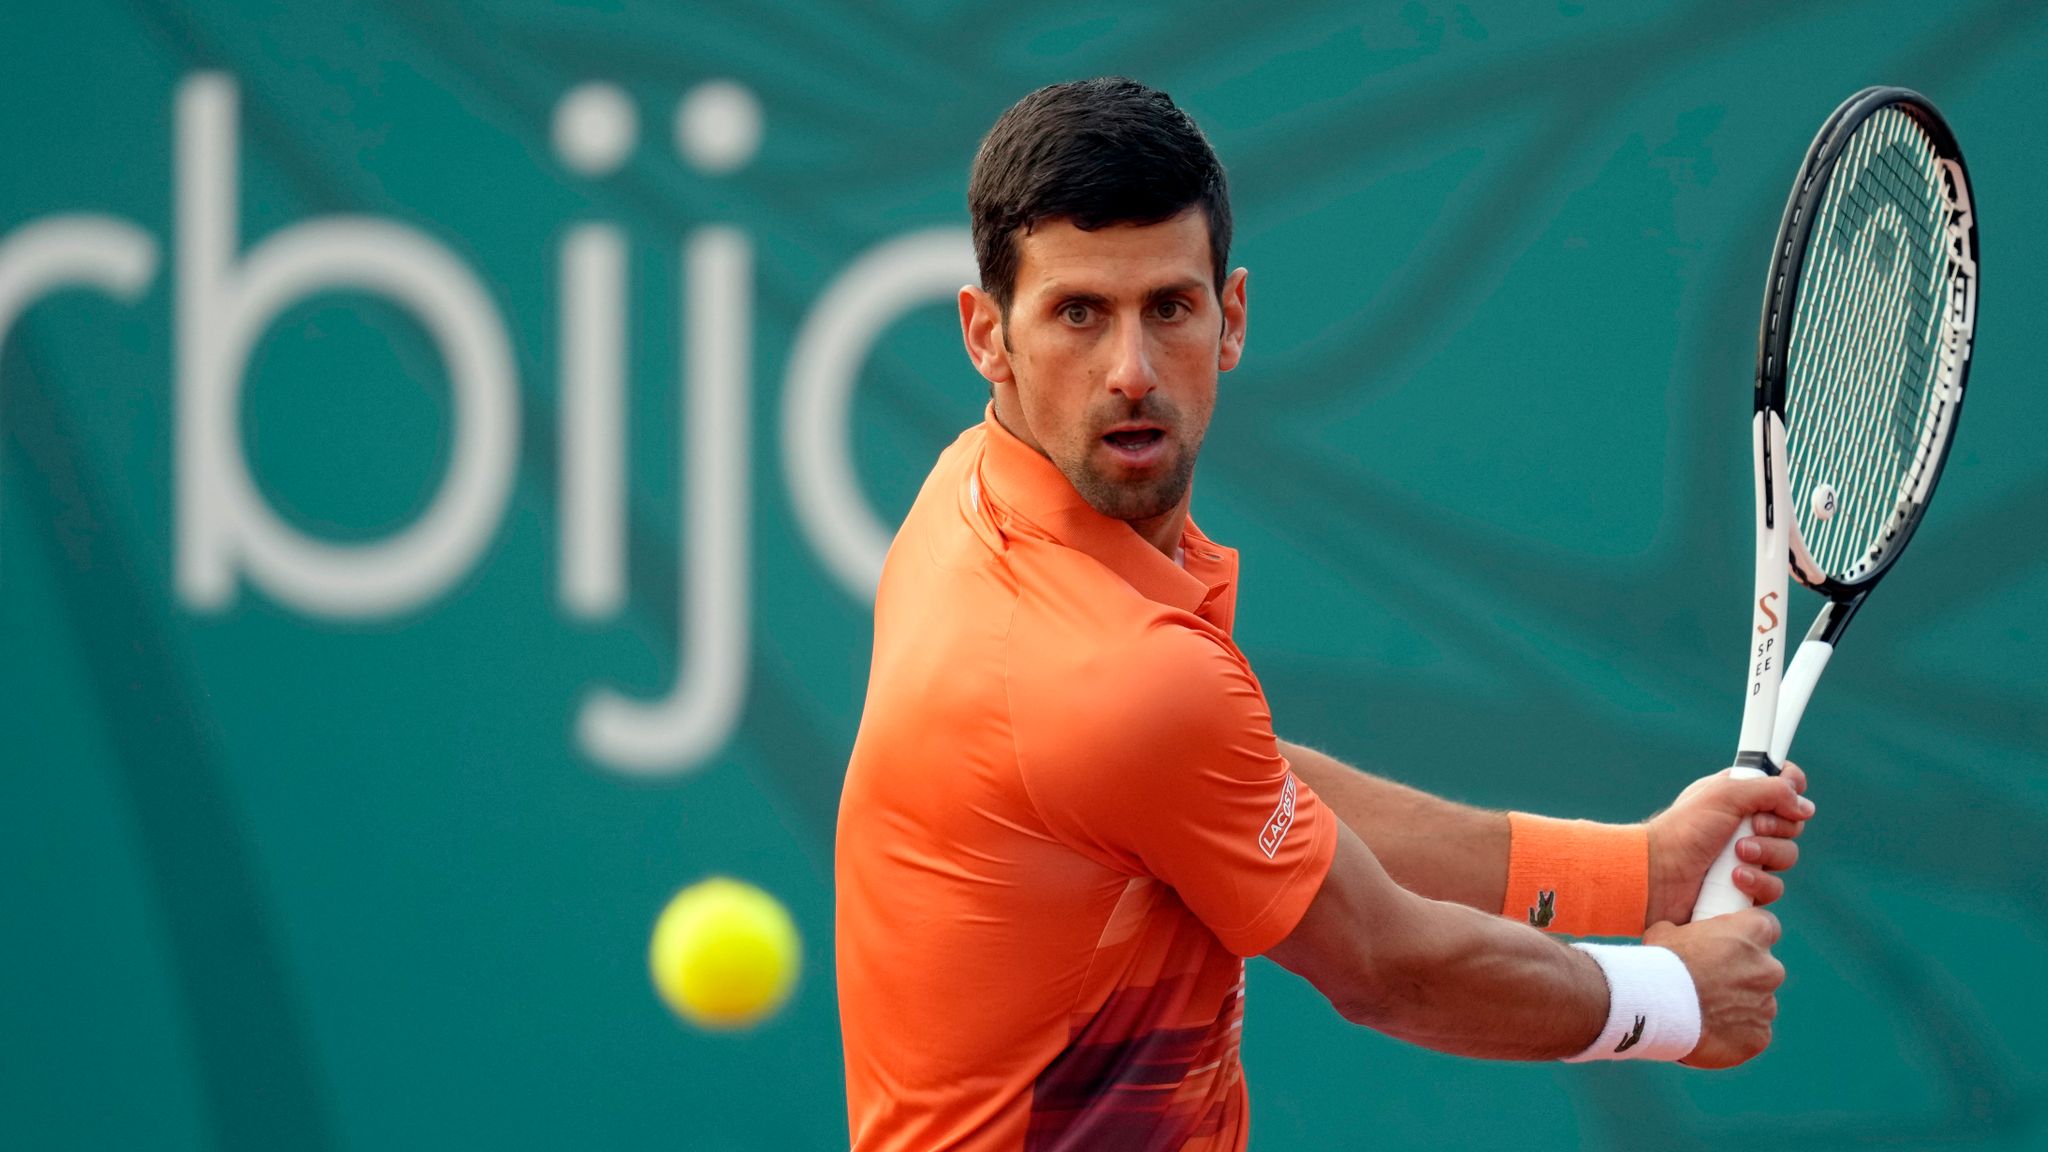 Tennis Update: Djokovic ran out of gas in the Final and referred to a previous illness